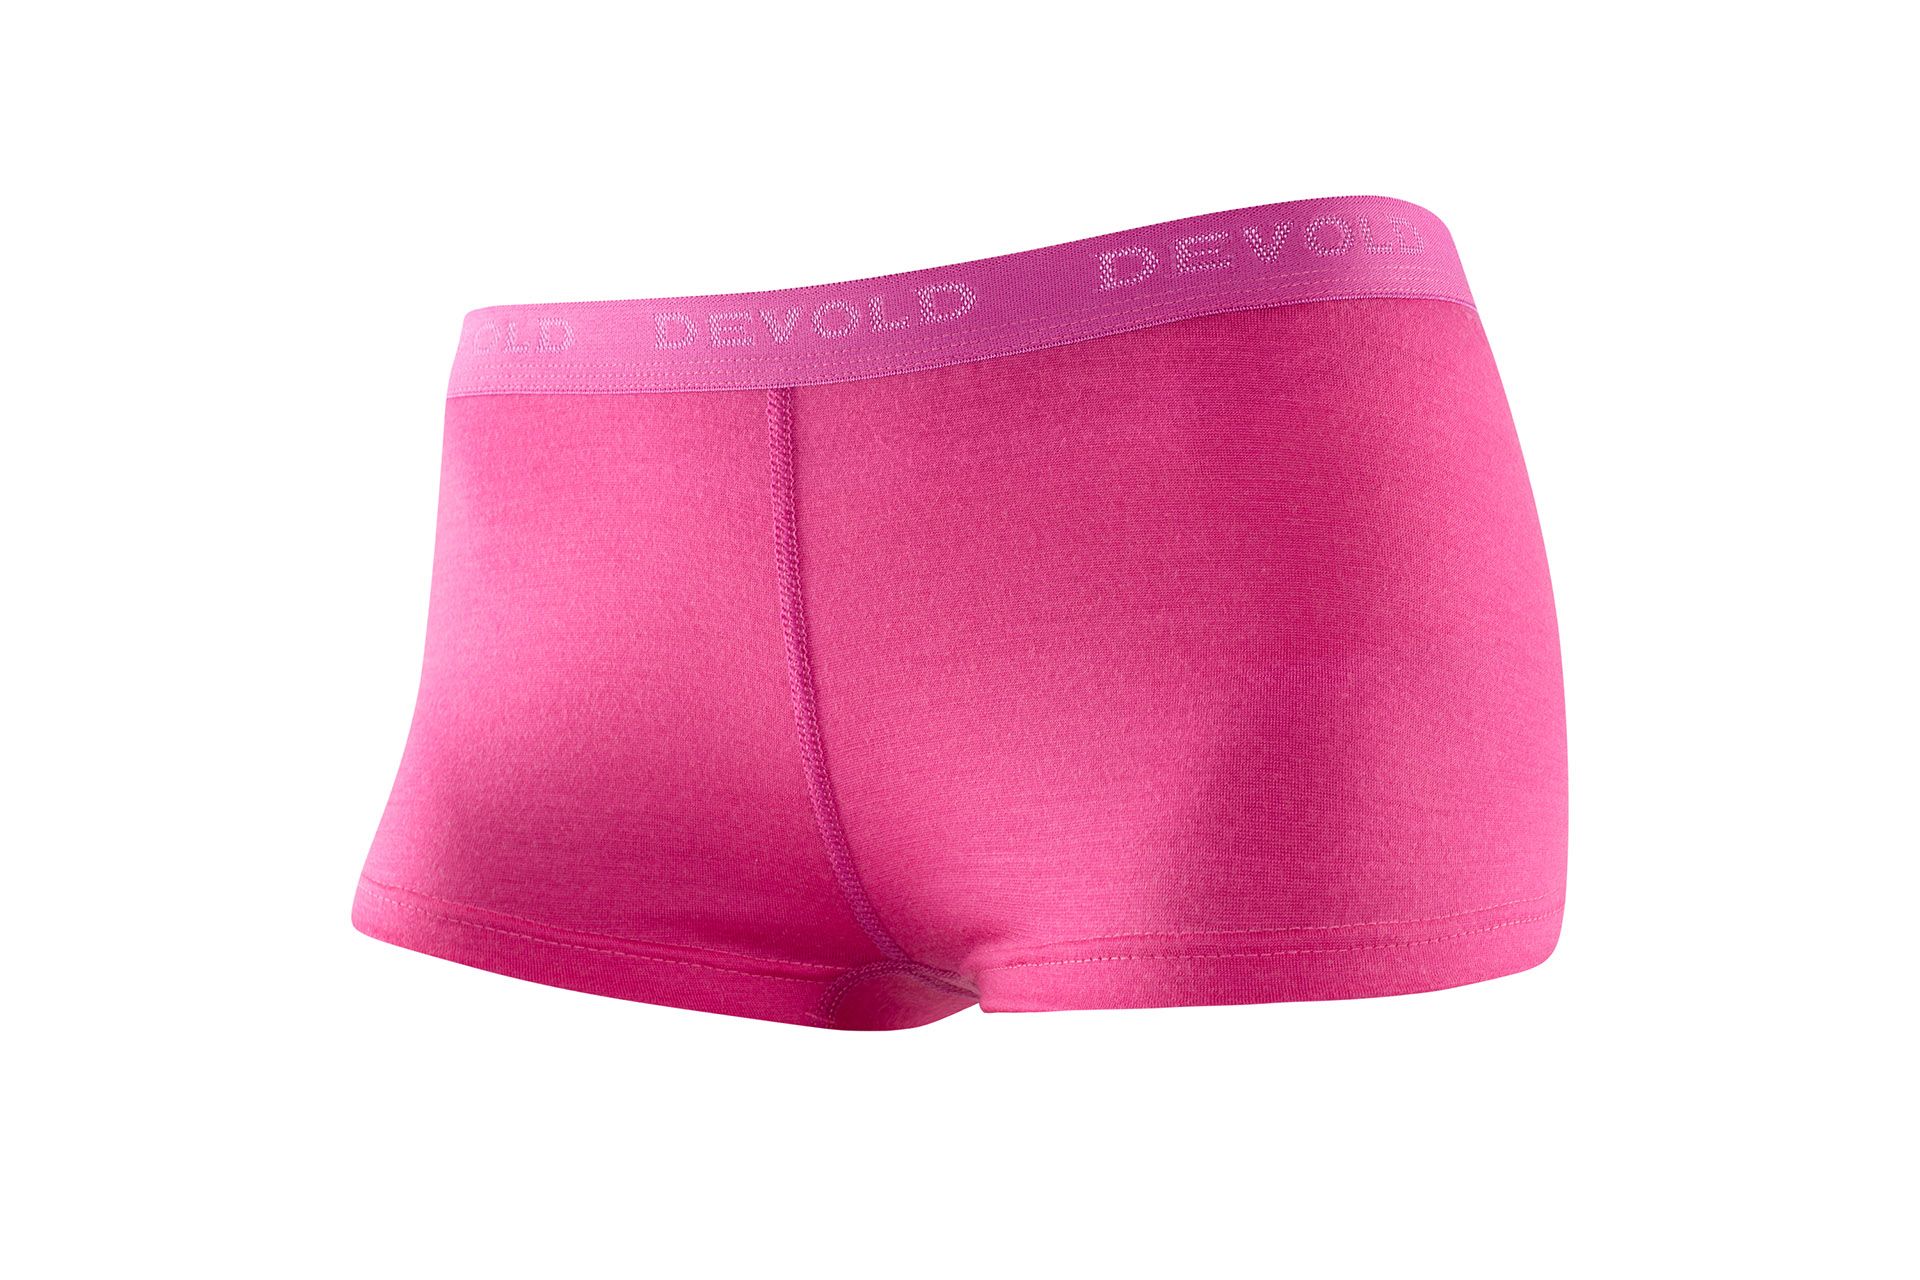 DEVOLD Breeze Woman, Modell "Hipster" Pink